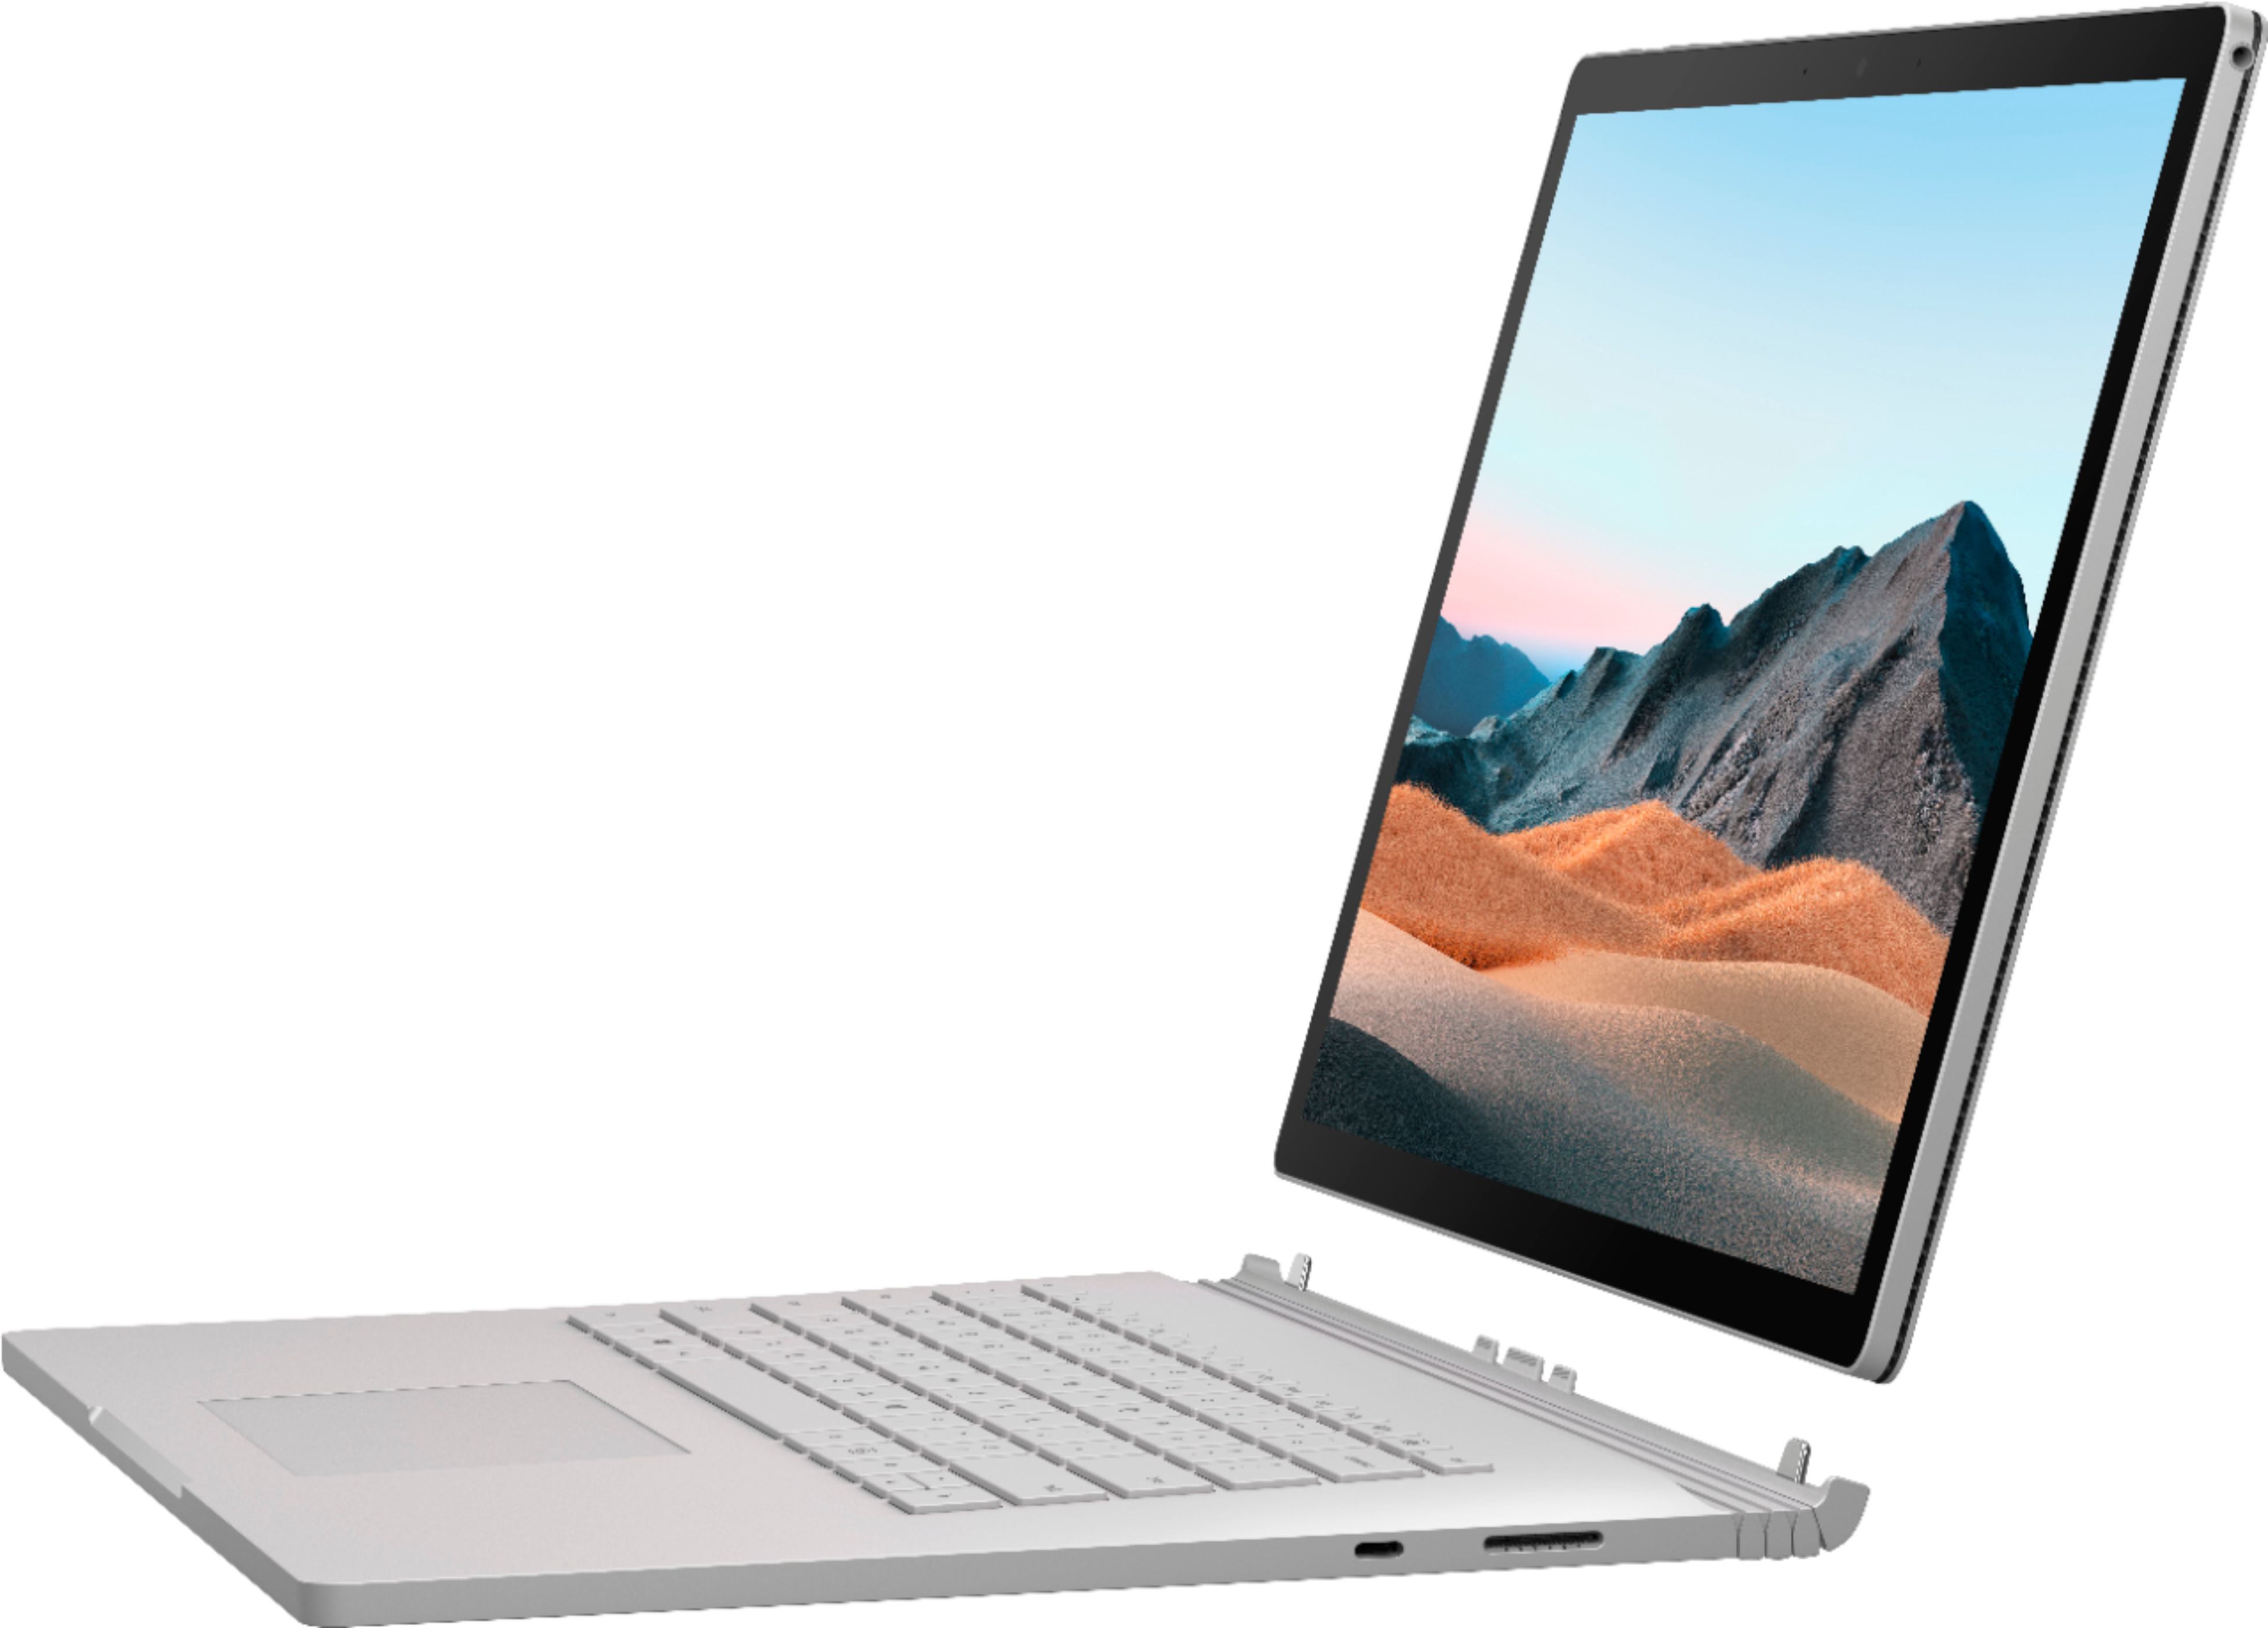 Microsoft - Geek Squad Certified Refurbished Surface Book 3 15" Touch-Screen - Intel Core i7 - 32GB Memory - 512GB SSD